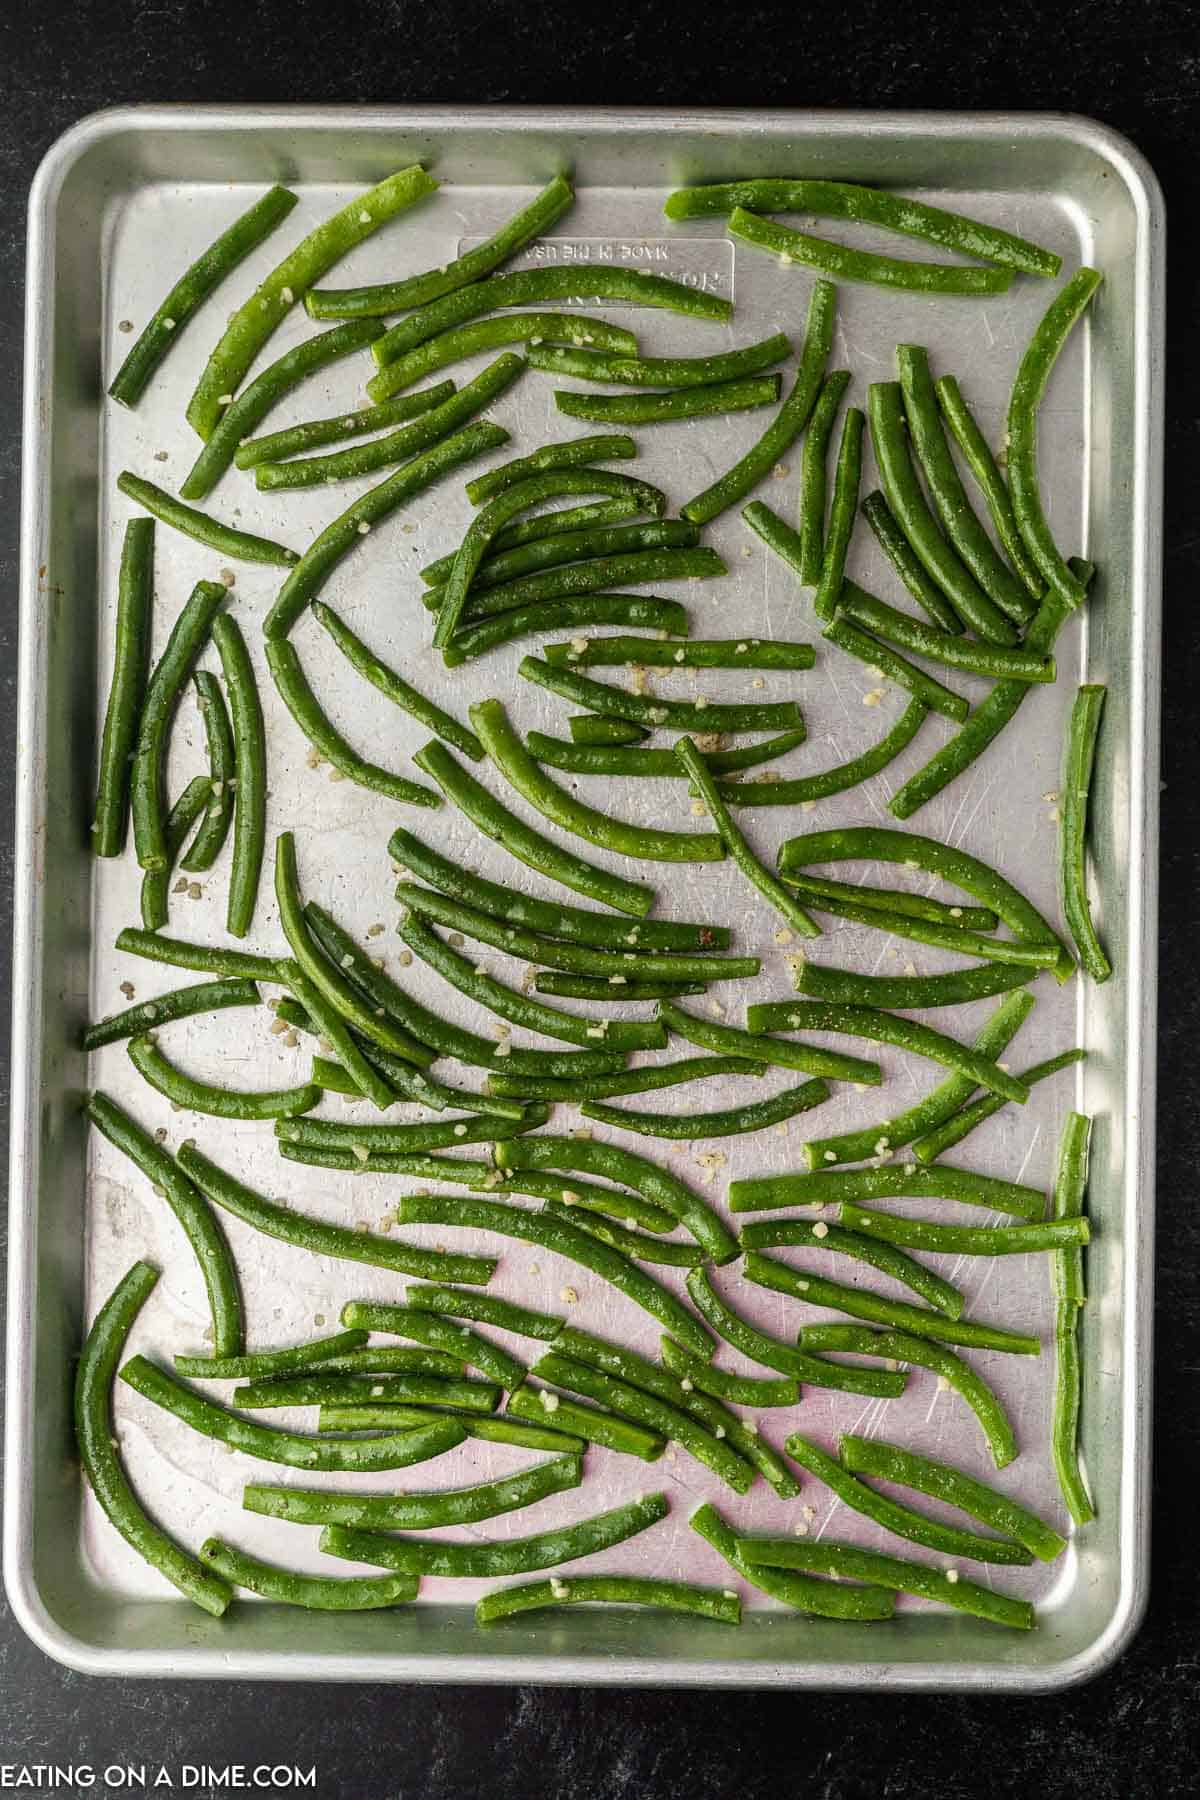 Spreading the green beans on a baking sheet